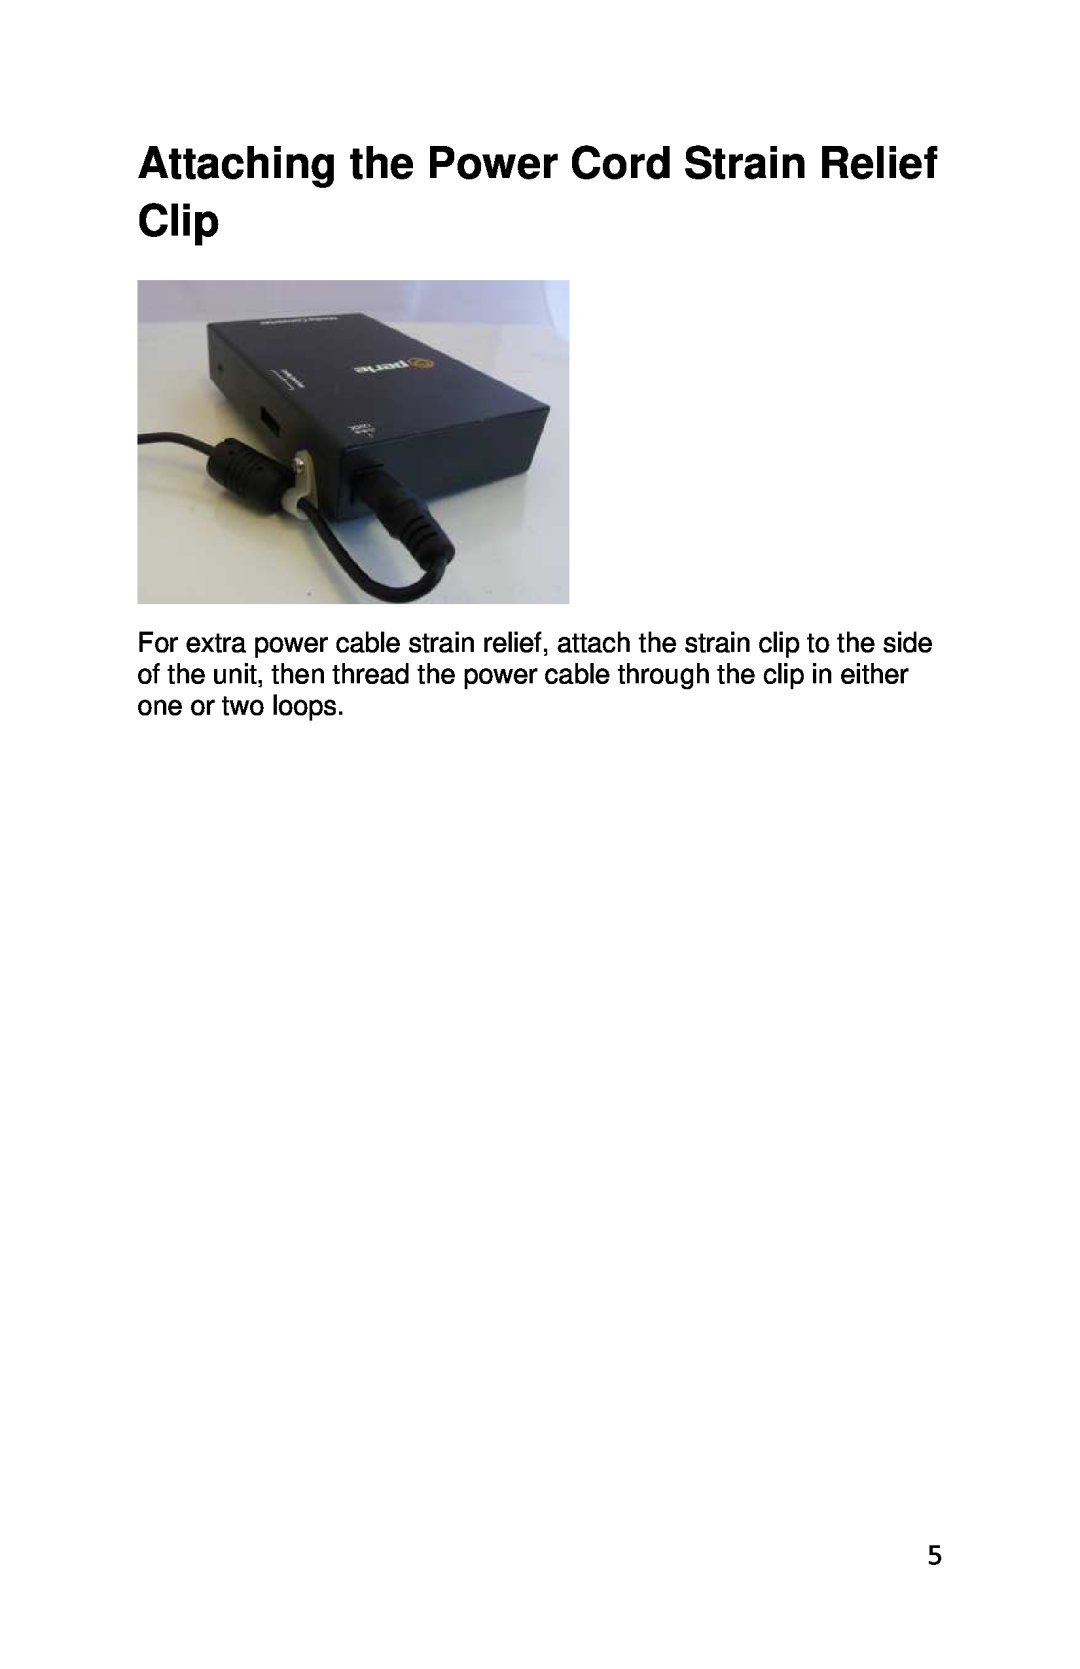 Perle Systems S-4GPT-DSFP-XT manual Attaching the Power Cord Strain Relief Clip 